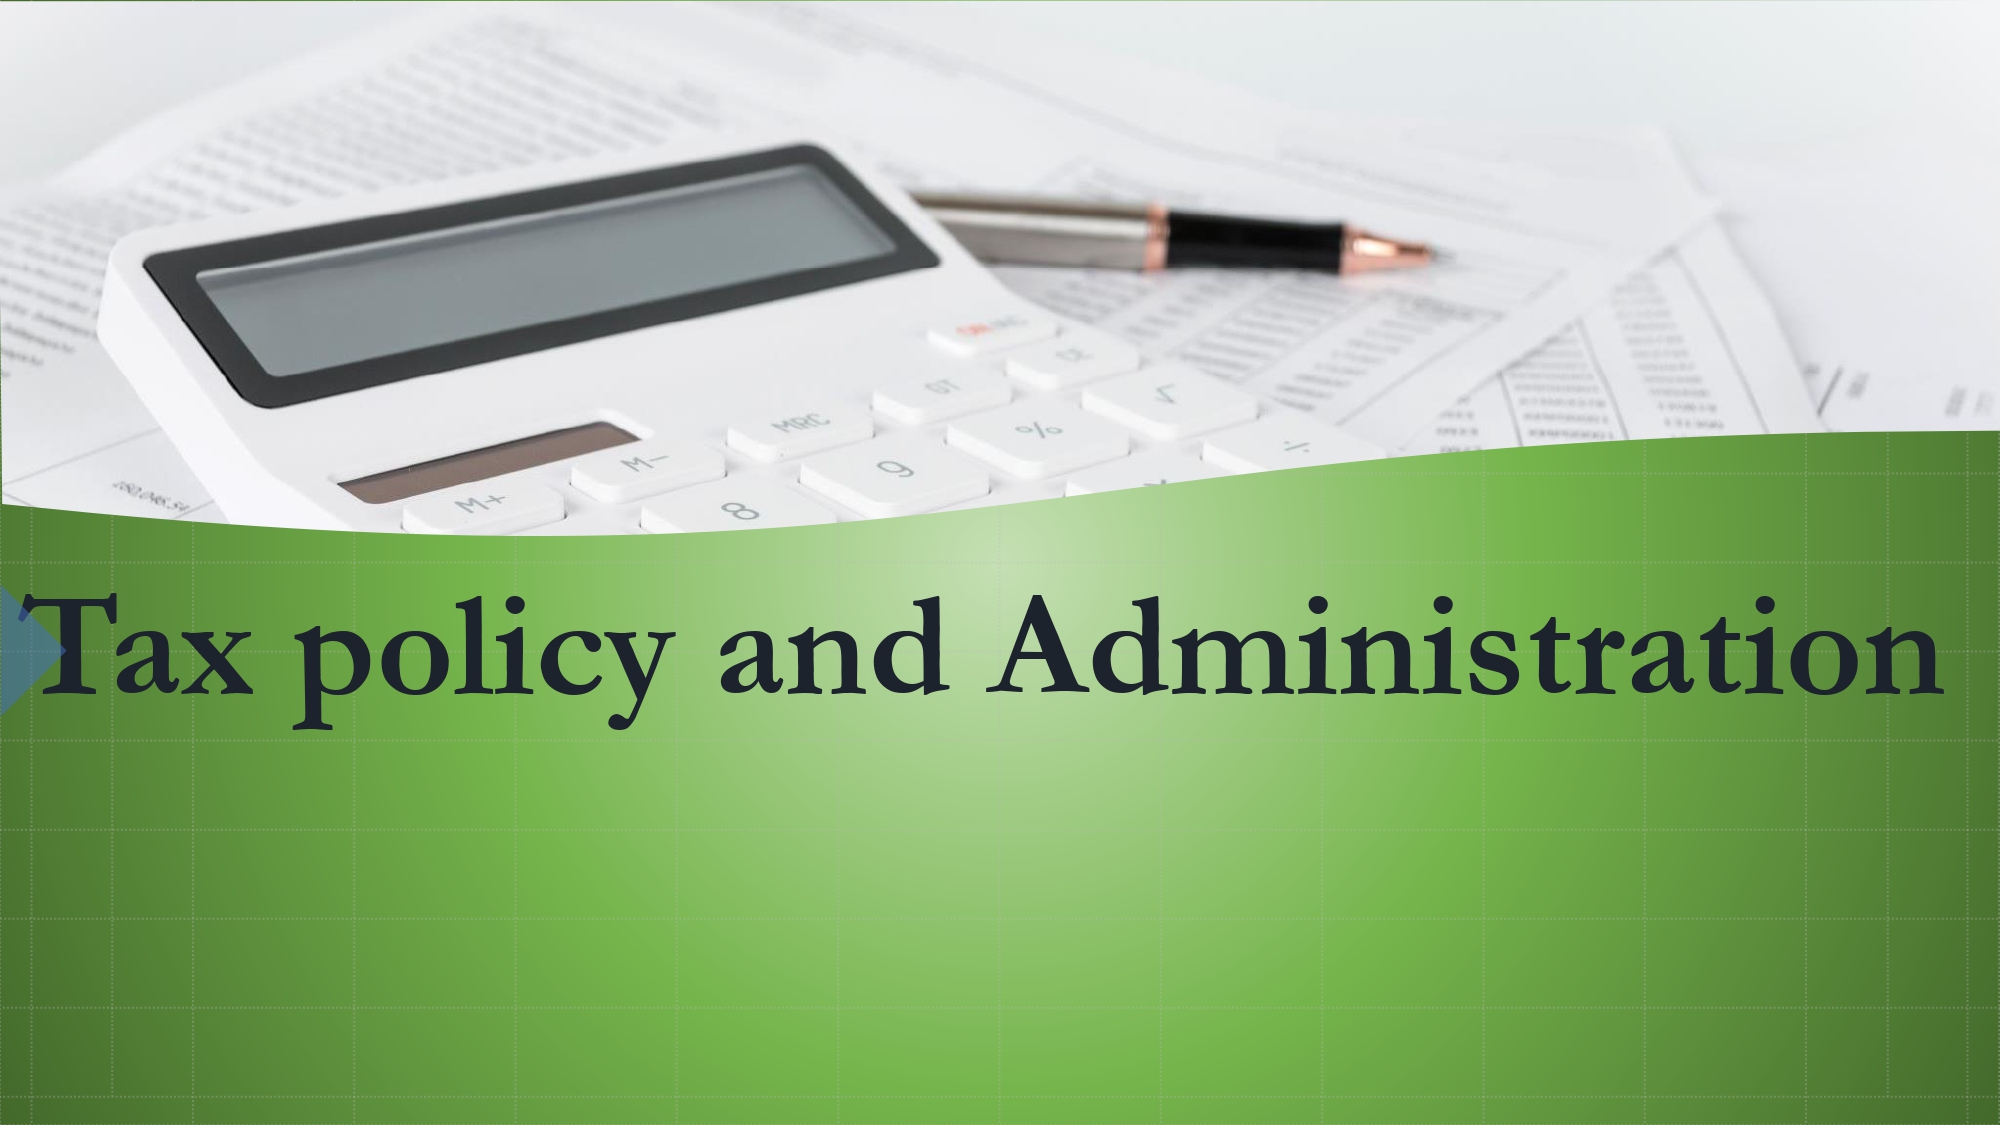 Tax policy and Administration